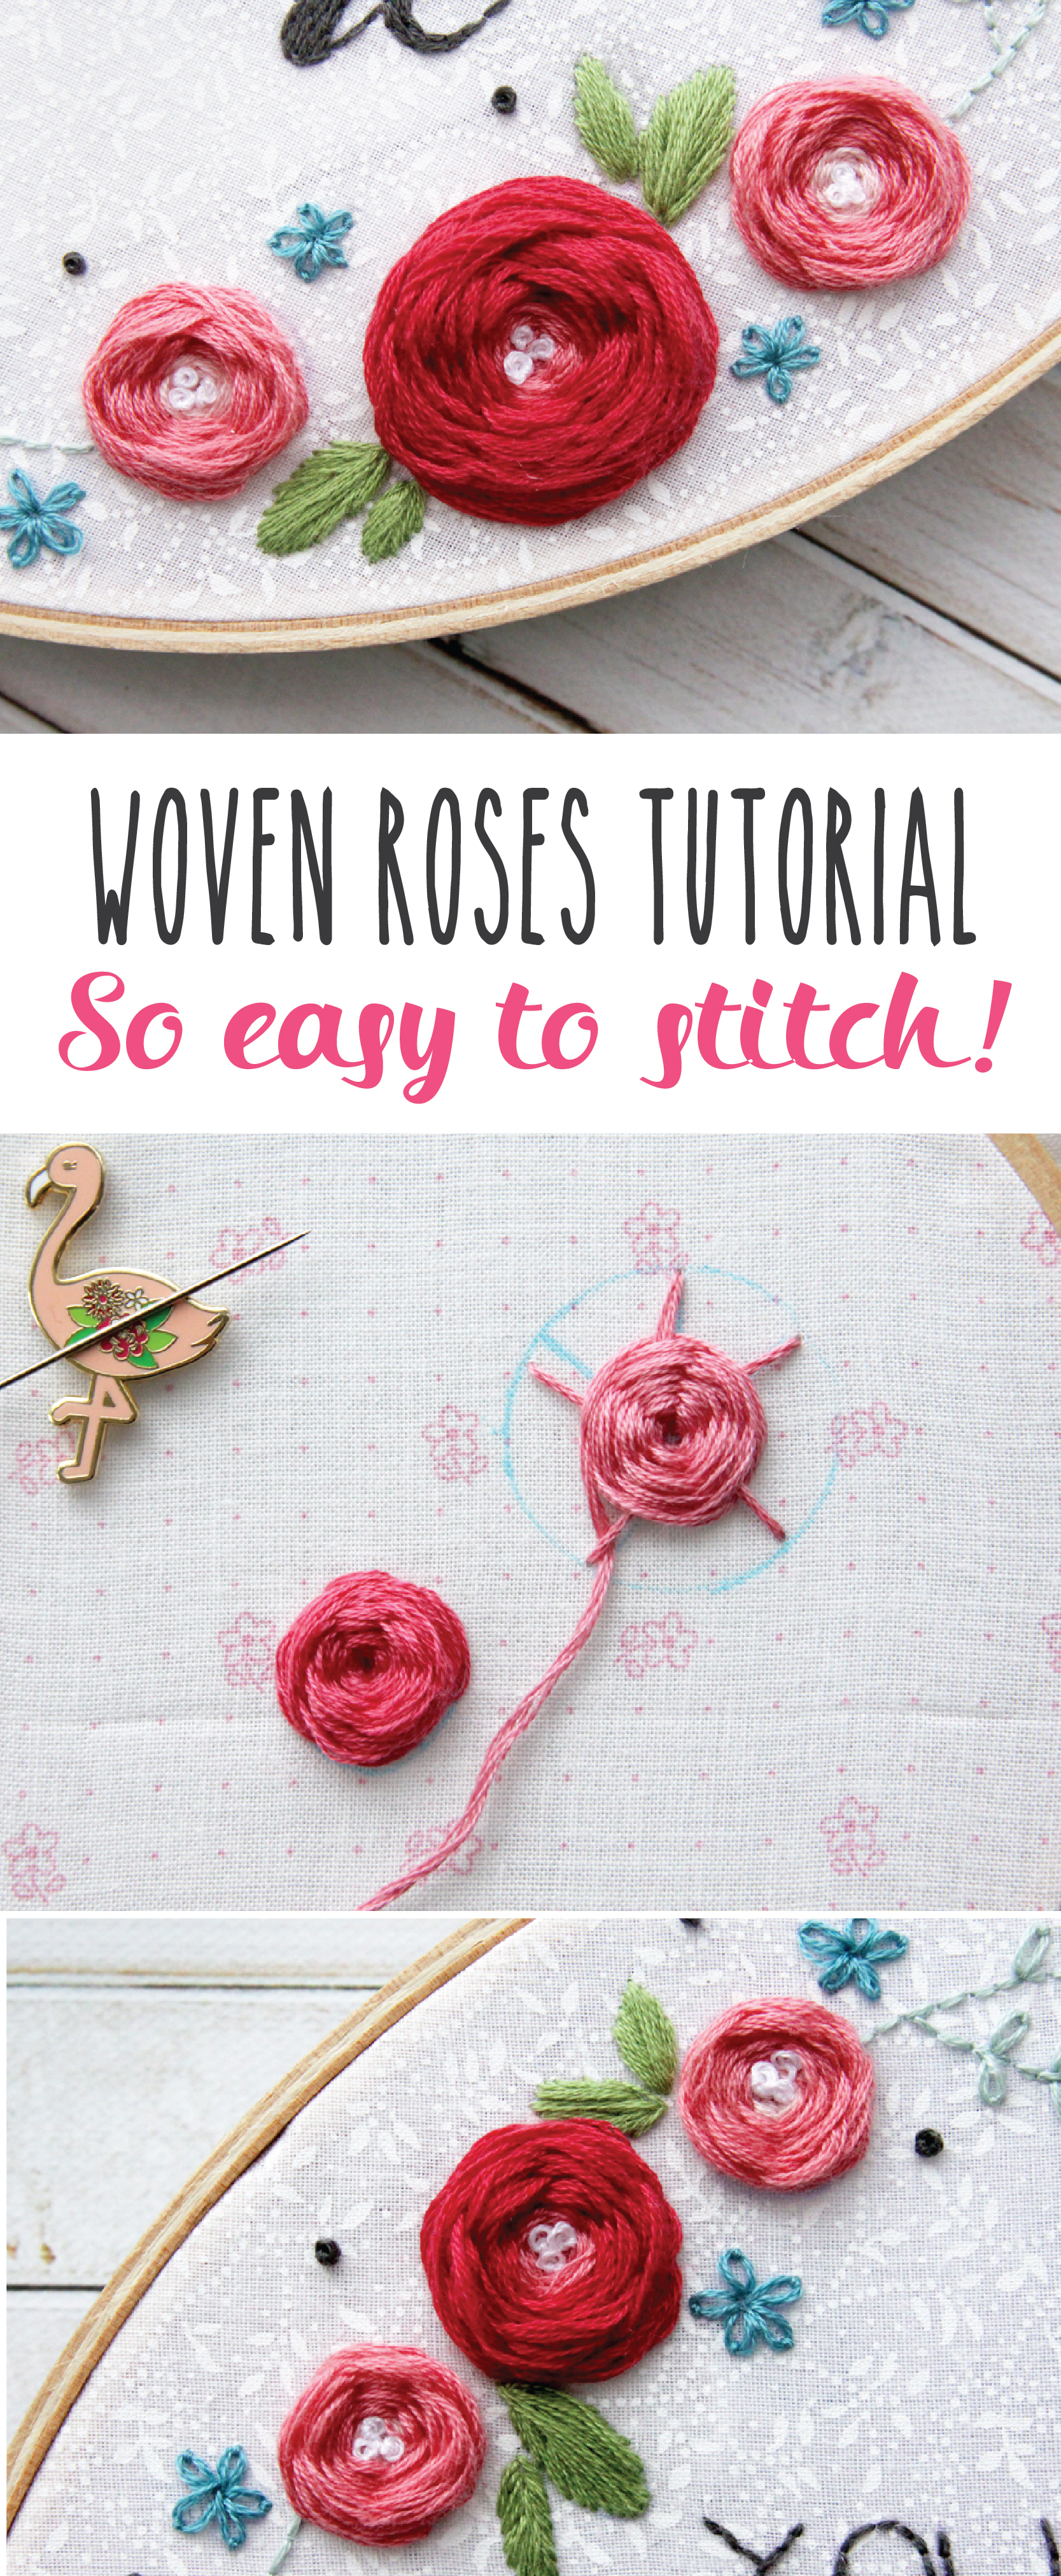 Rose Embroidery Pattern Woven Or Wagon Wheel Roses Embroidery Stitch Tutorial